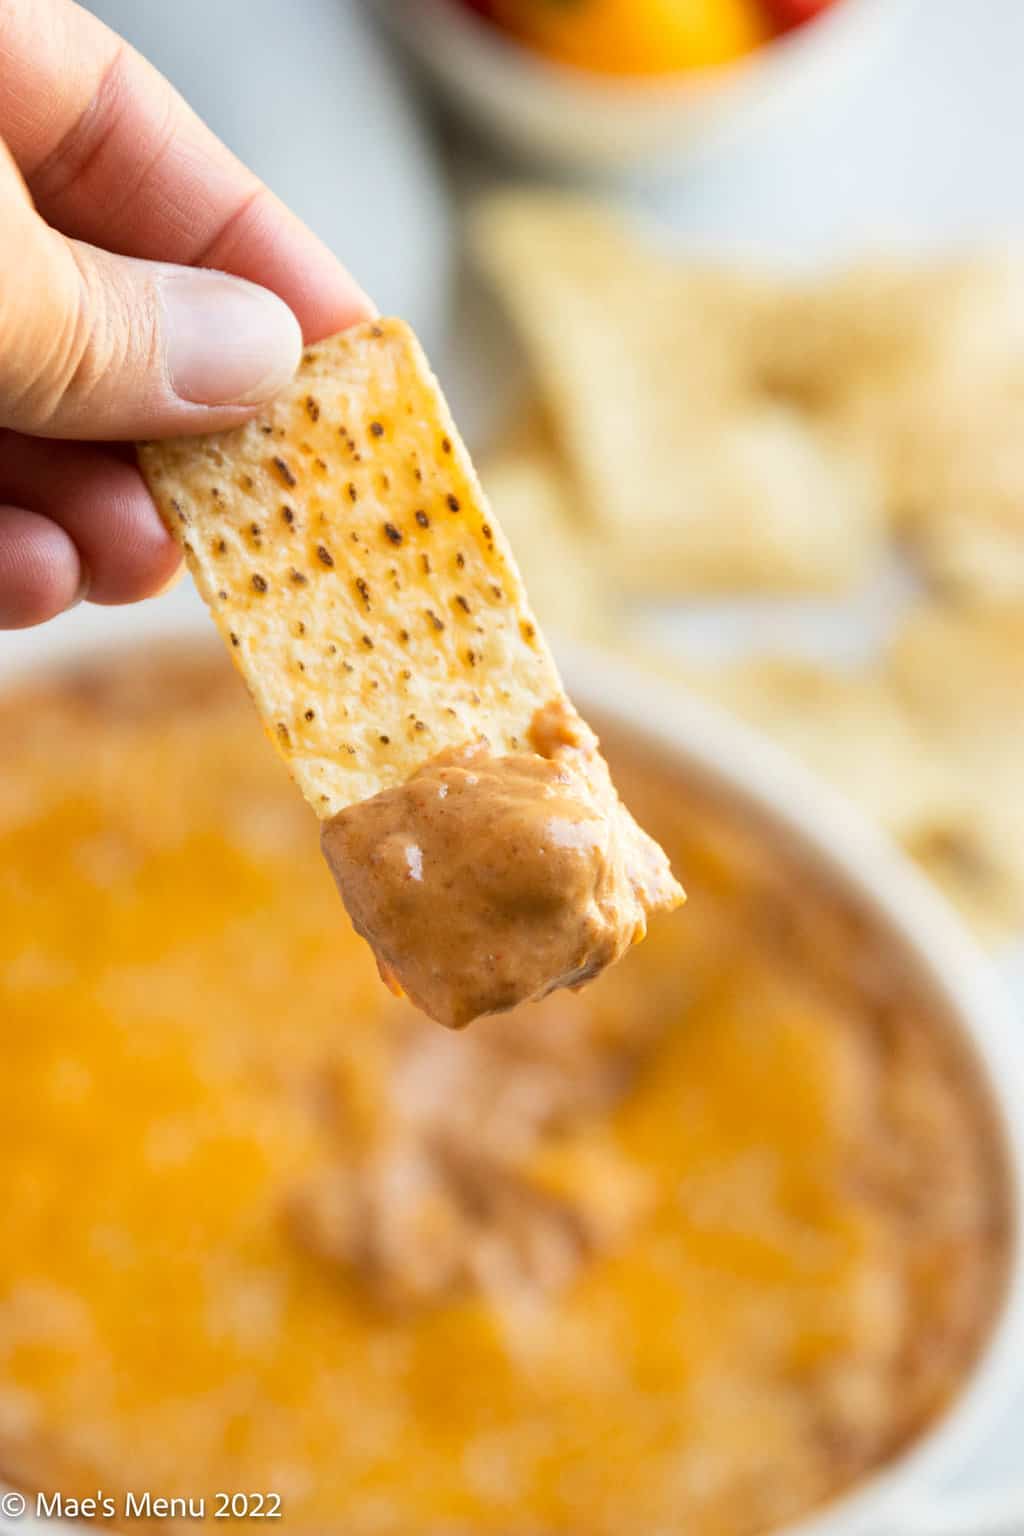 A tortilla chip with bean dip on it.